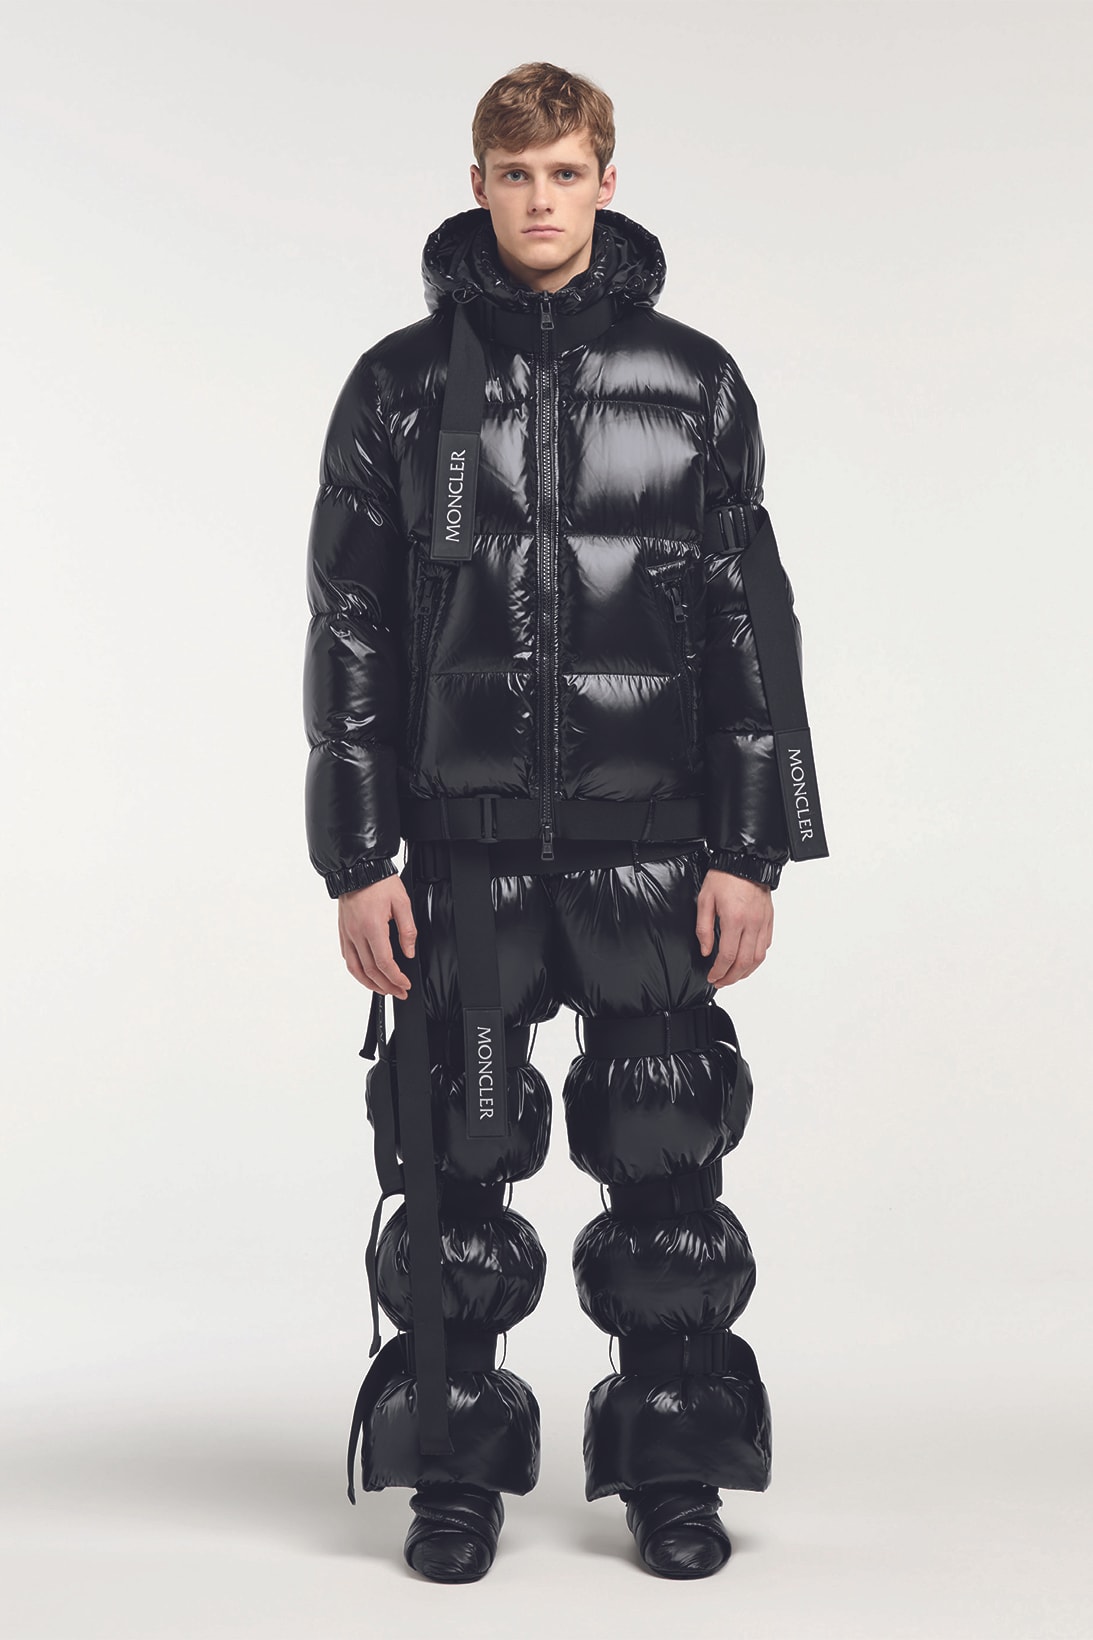 Moncler C by Craig Green Collection | Hypebeast